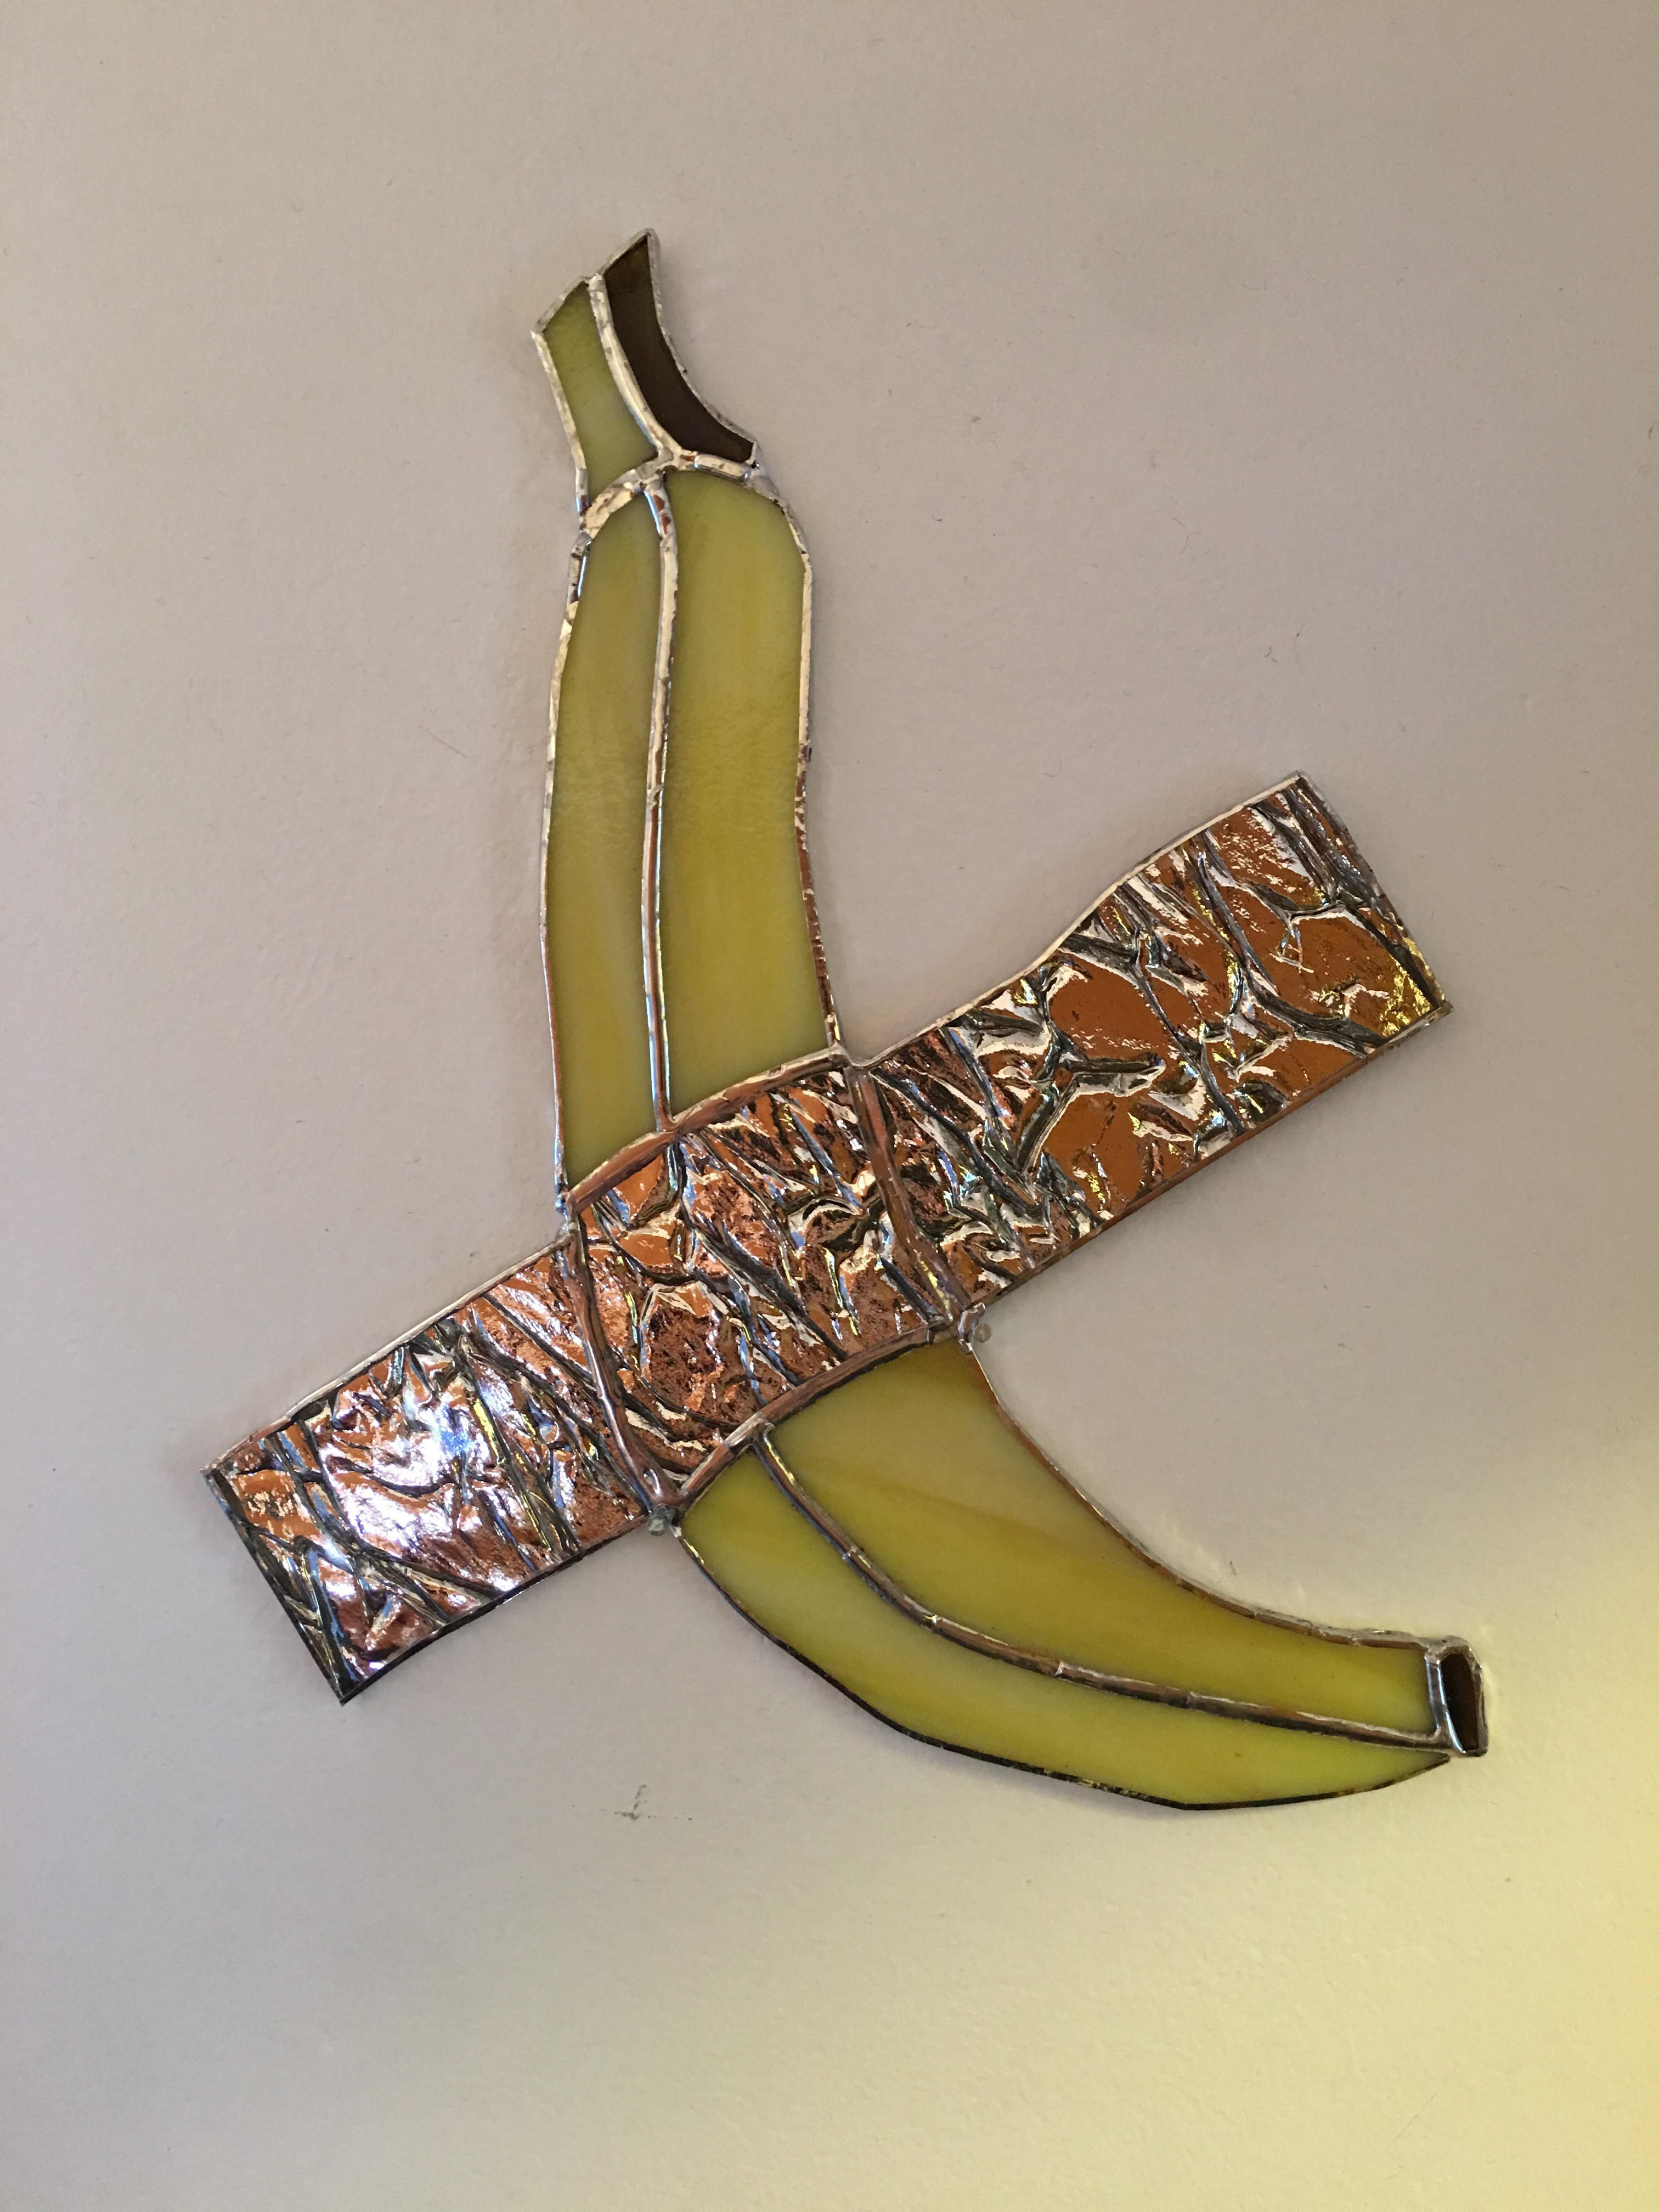 I made some stained glass worth $120,000. Banana, me, stained glass, 2019